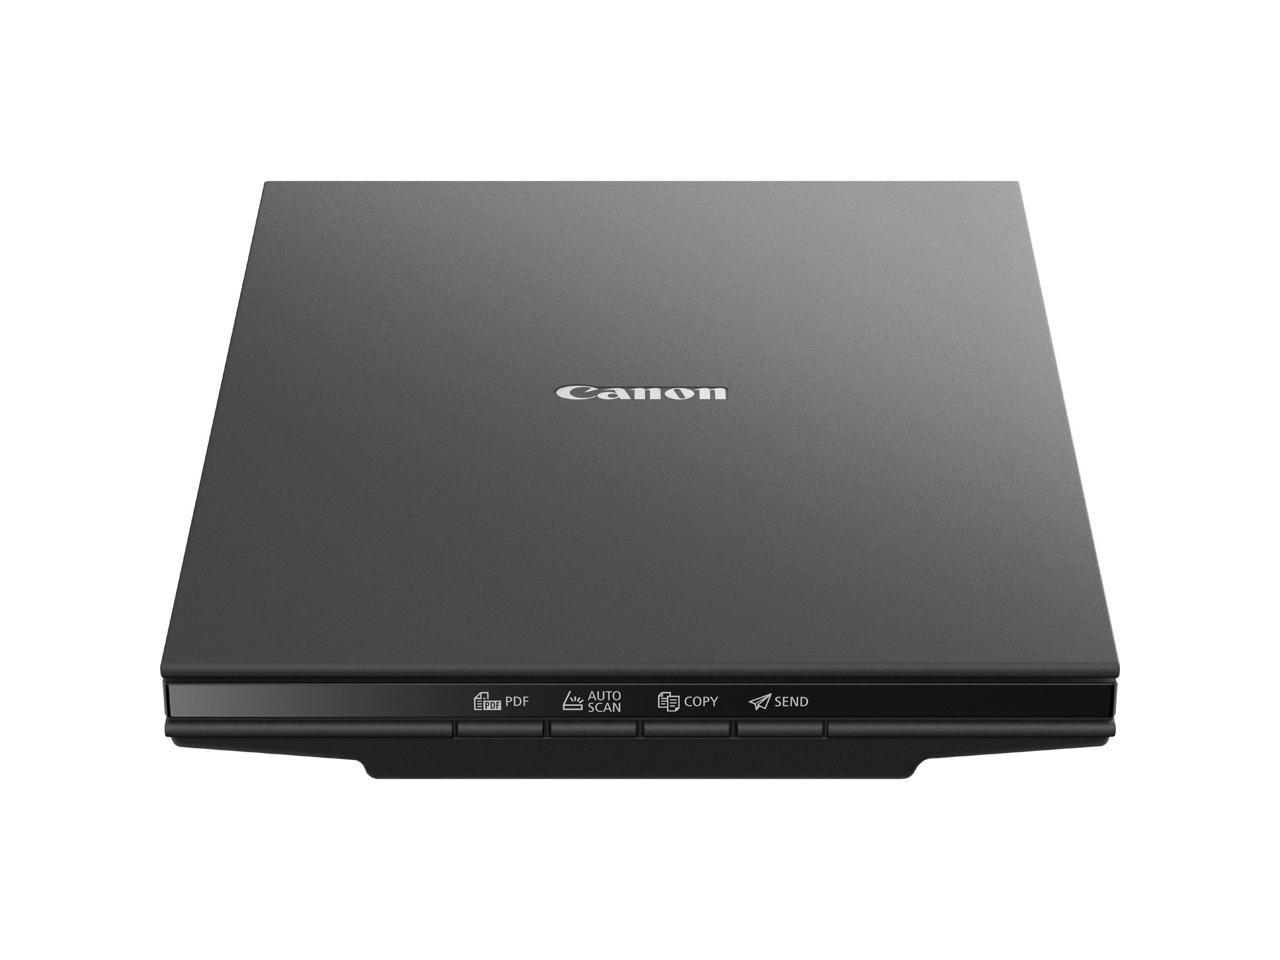 Canon CanoScan LiDE 300 (2995C002) 2400 x 2400dpi Color: 48-bit Internal / 48-bit or 24-bit External Hi-Speed USB 2.0 (One Cable For Data & Power) Interface Flatbed Scanner